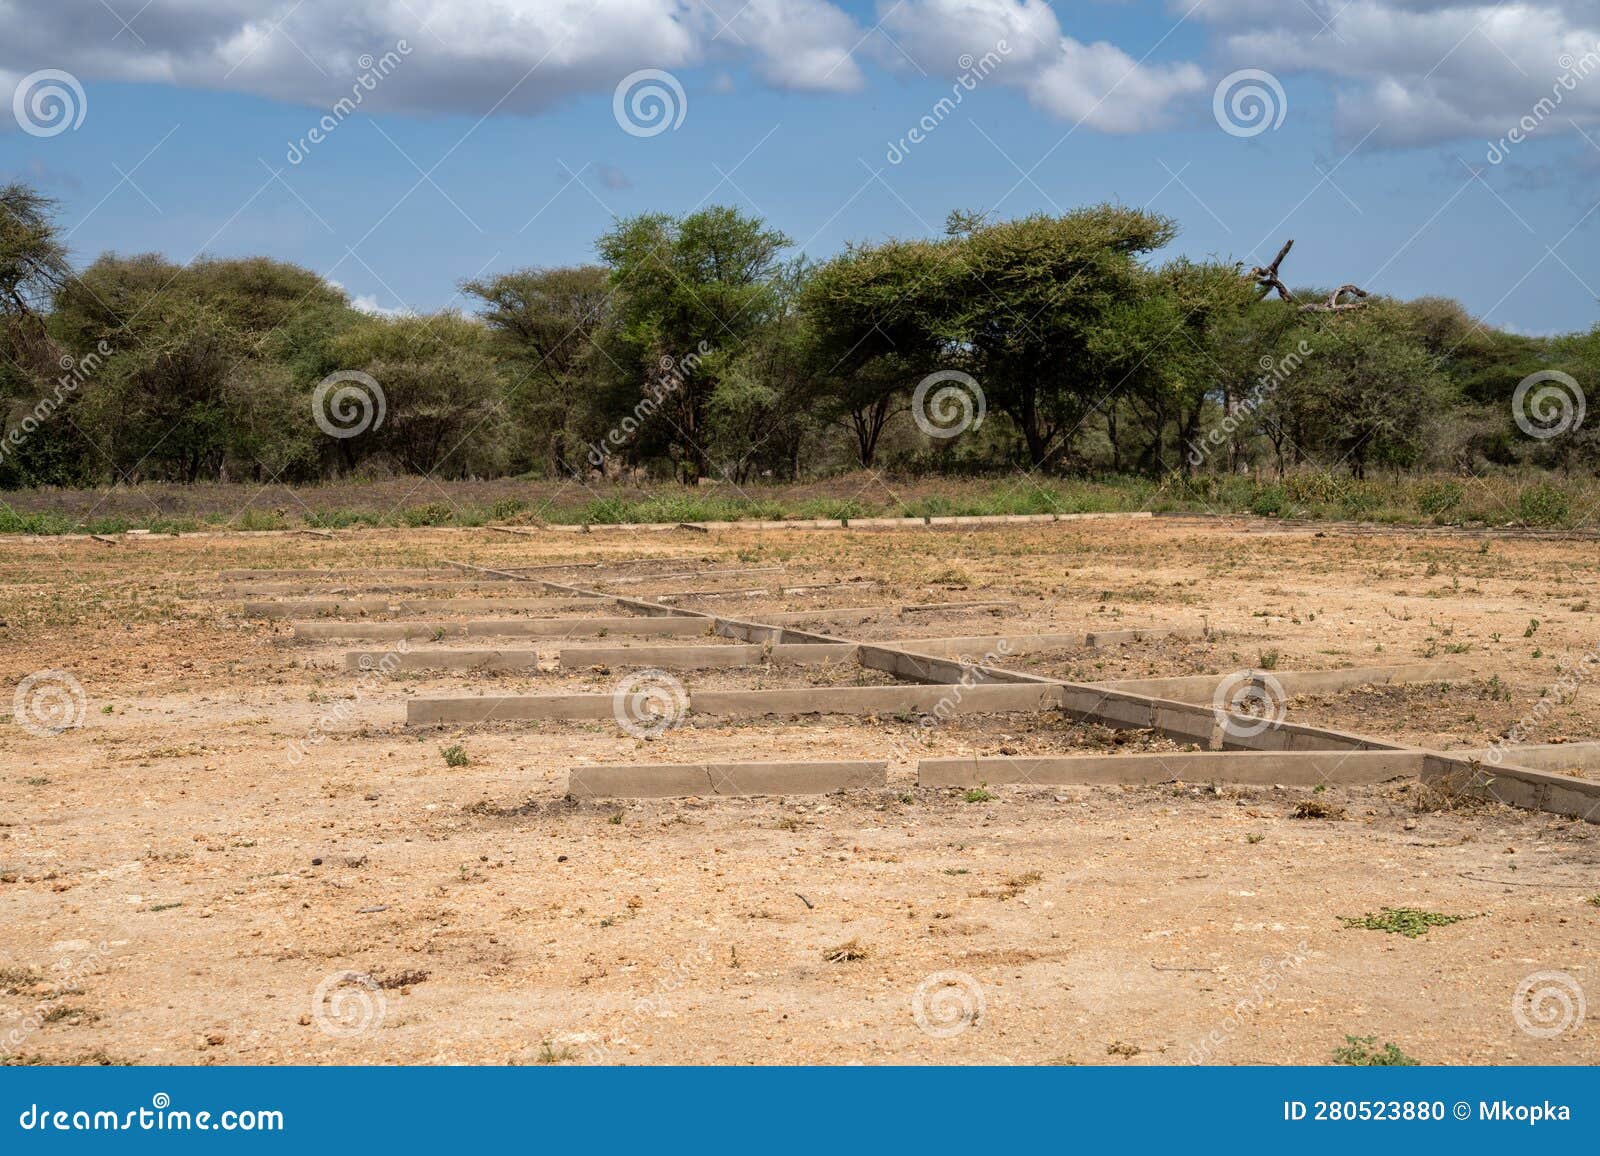 abandoned and unkept parking lot for safari vehicles in tarangire national park in tanzania